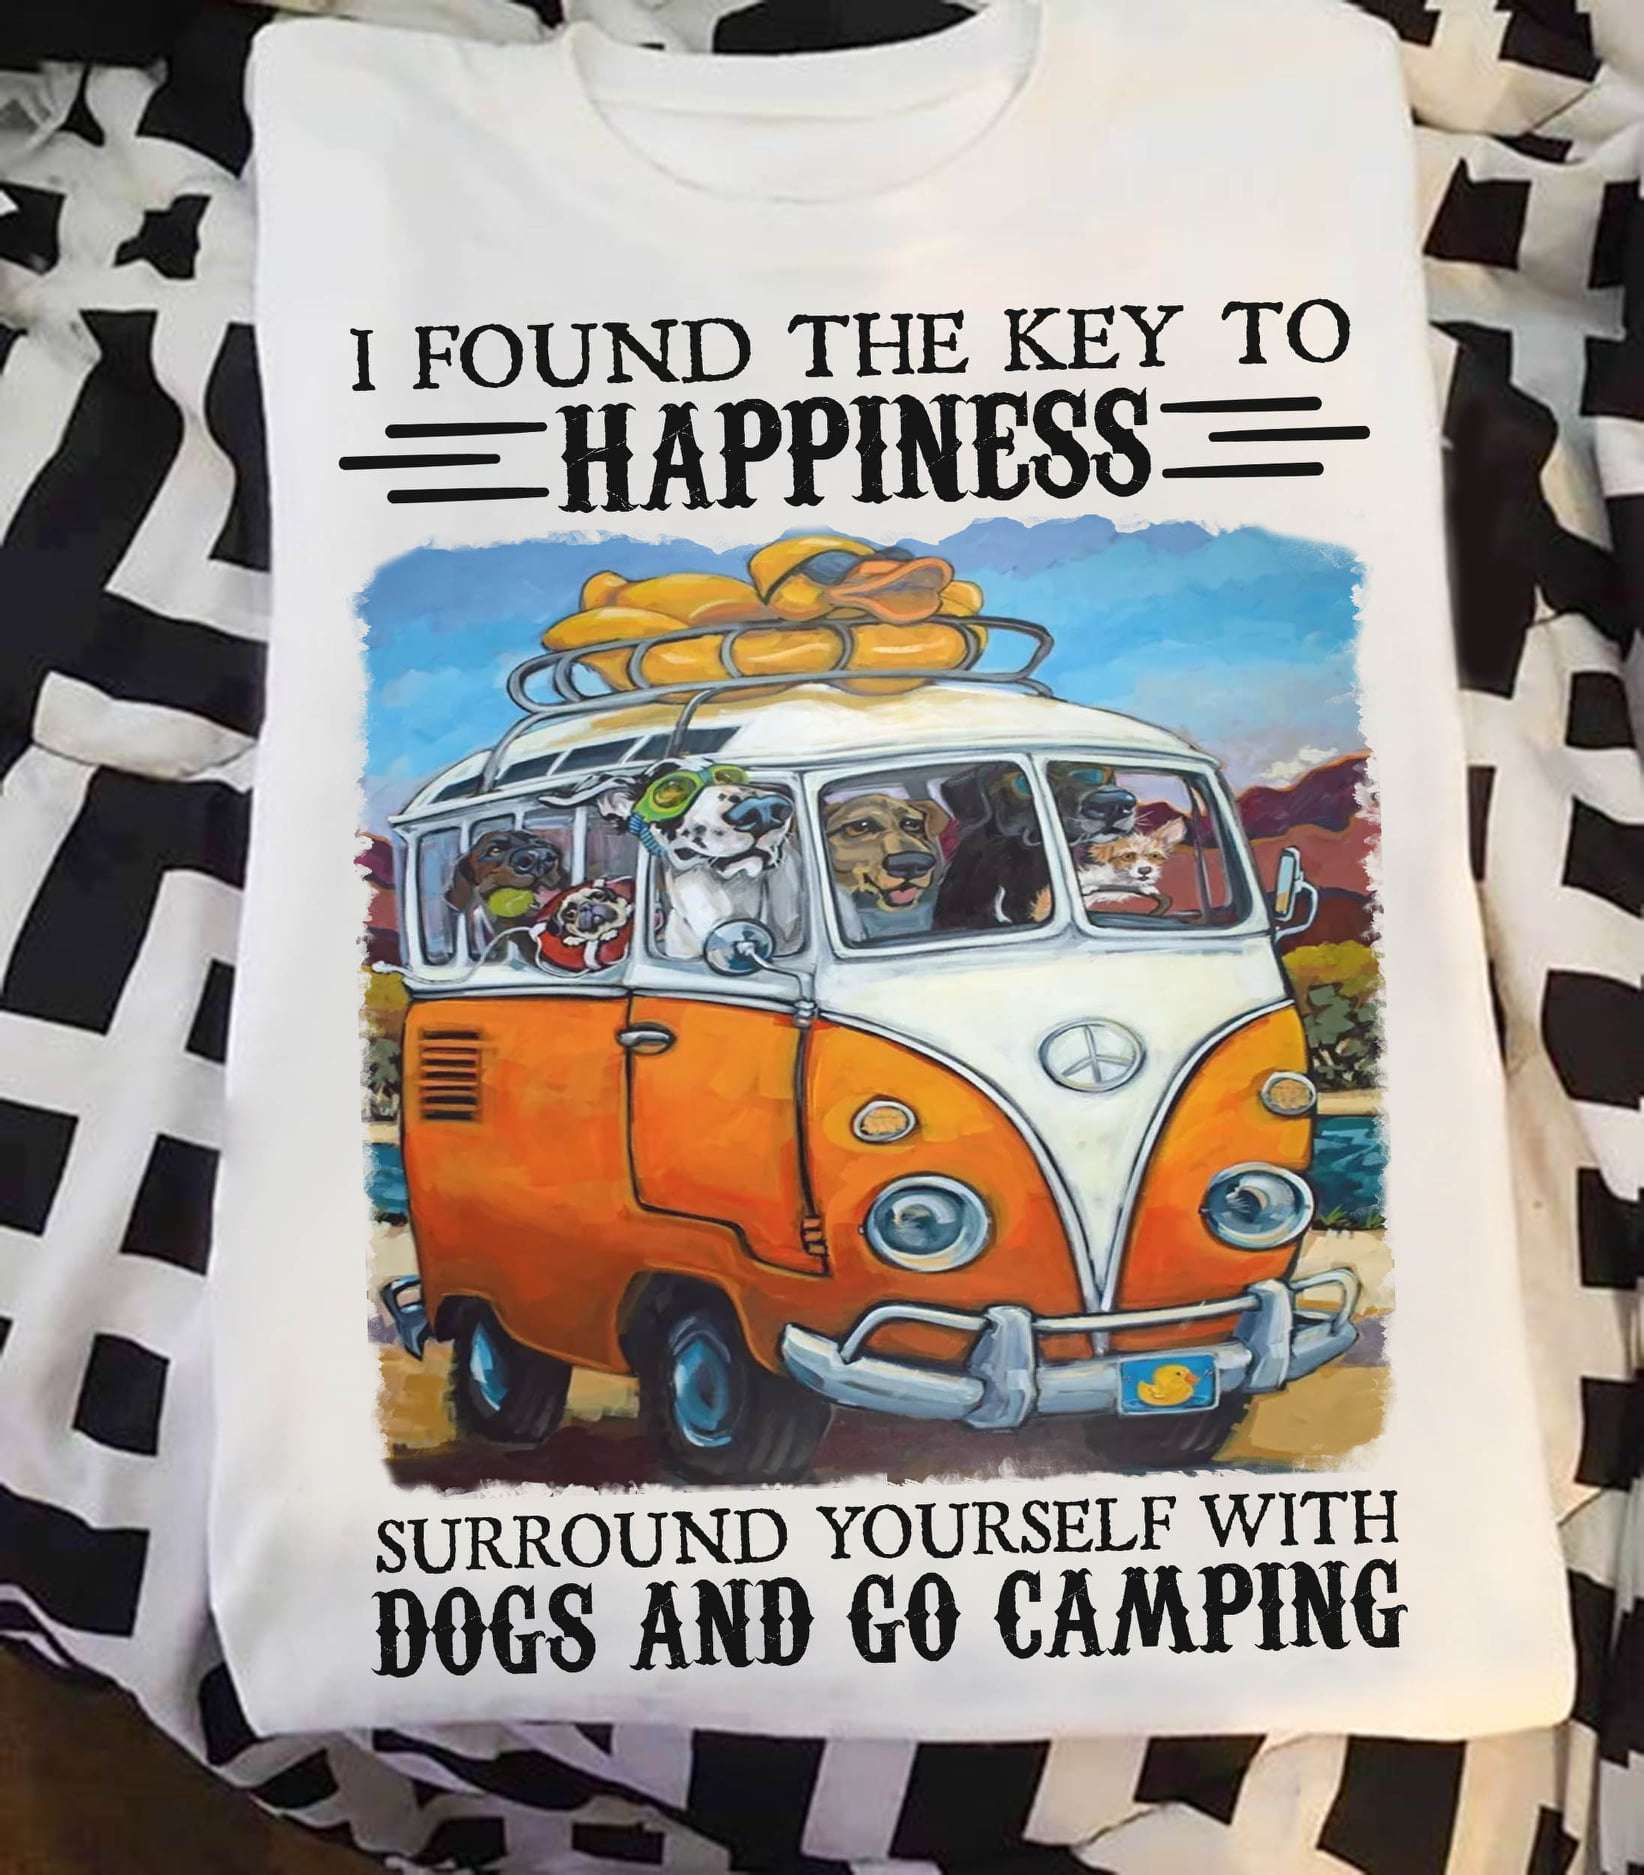 I found the key to happiness surround yourself with dogs and go camping - Go camping with dogs